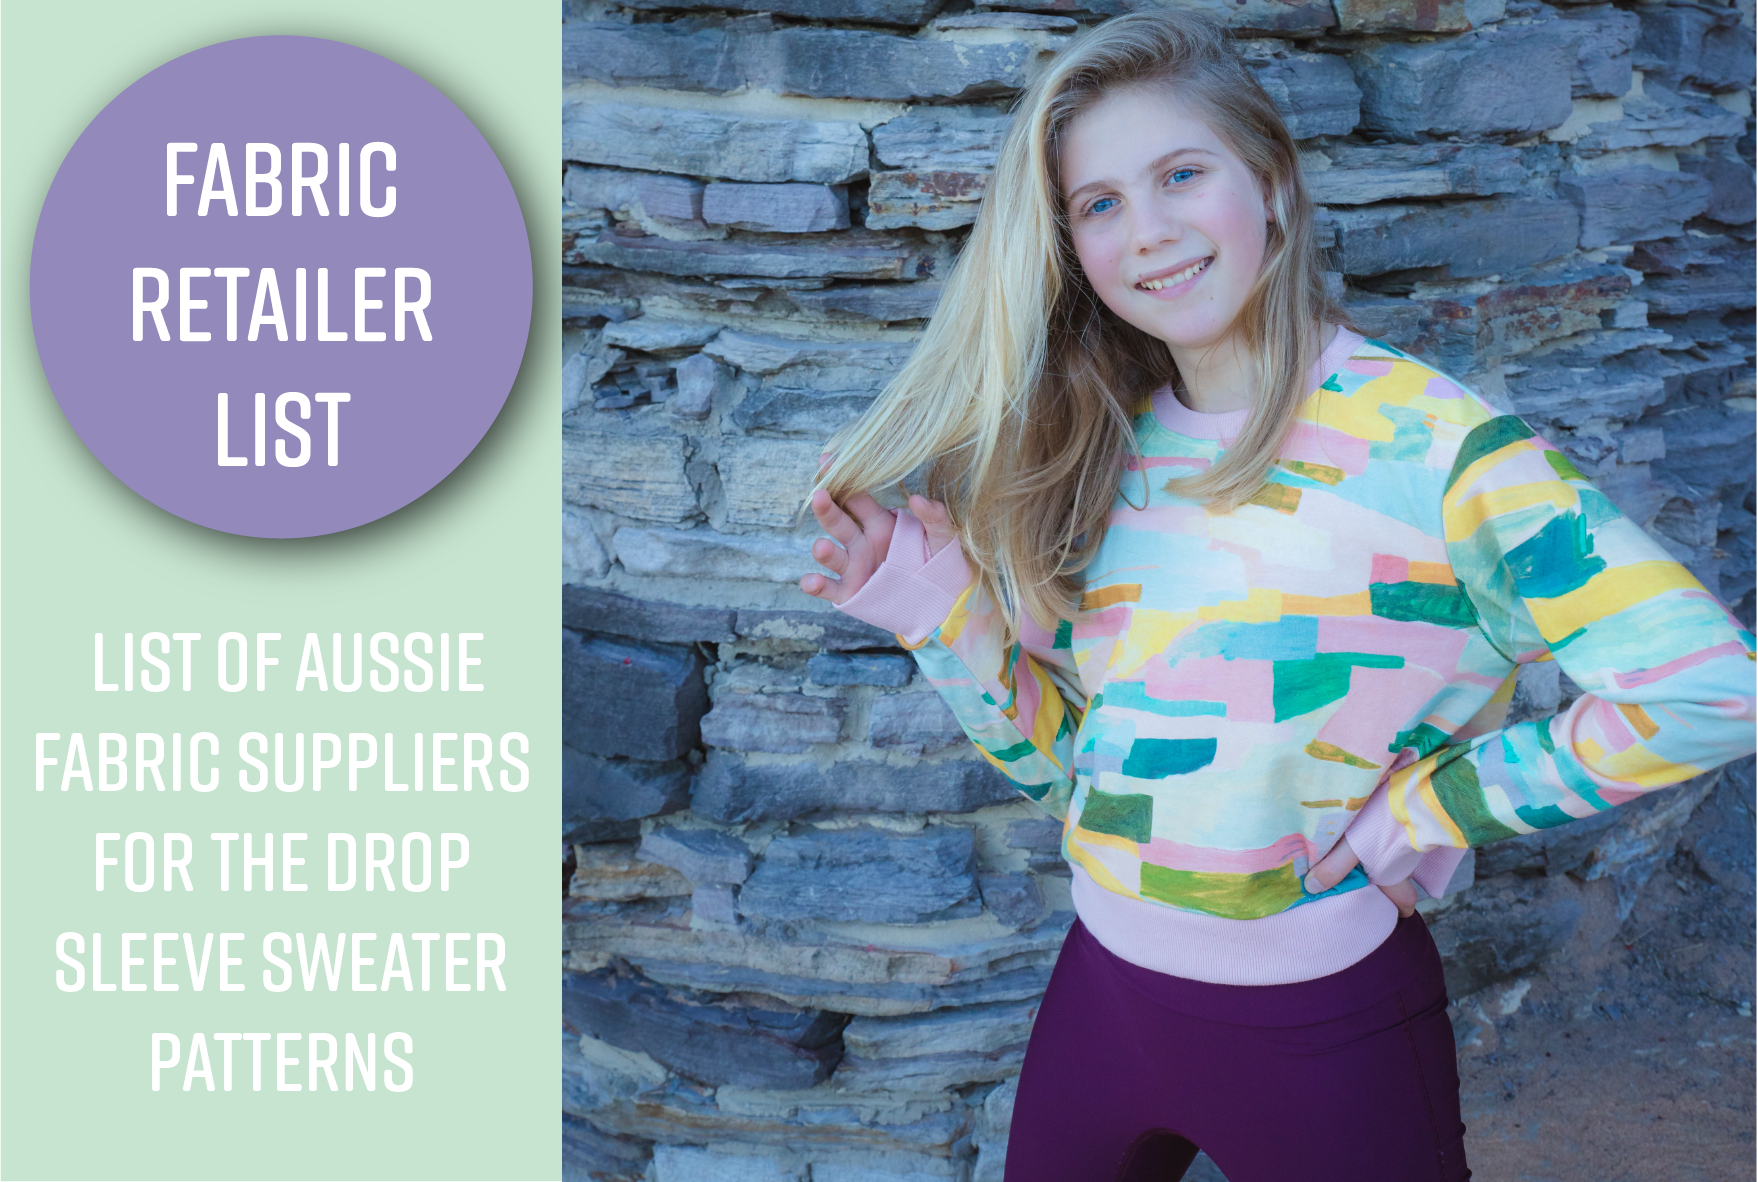 WHERE TO BUY ~ Fabric suppliers in AUS for the Drop Sleeve Sweater patterns